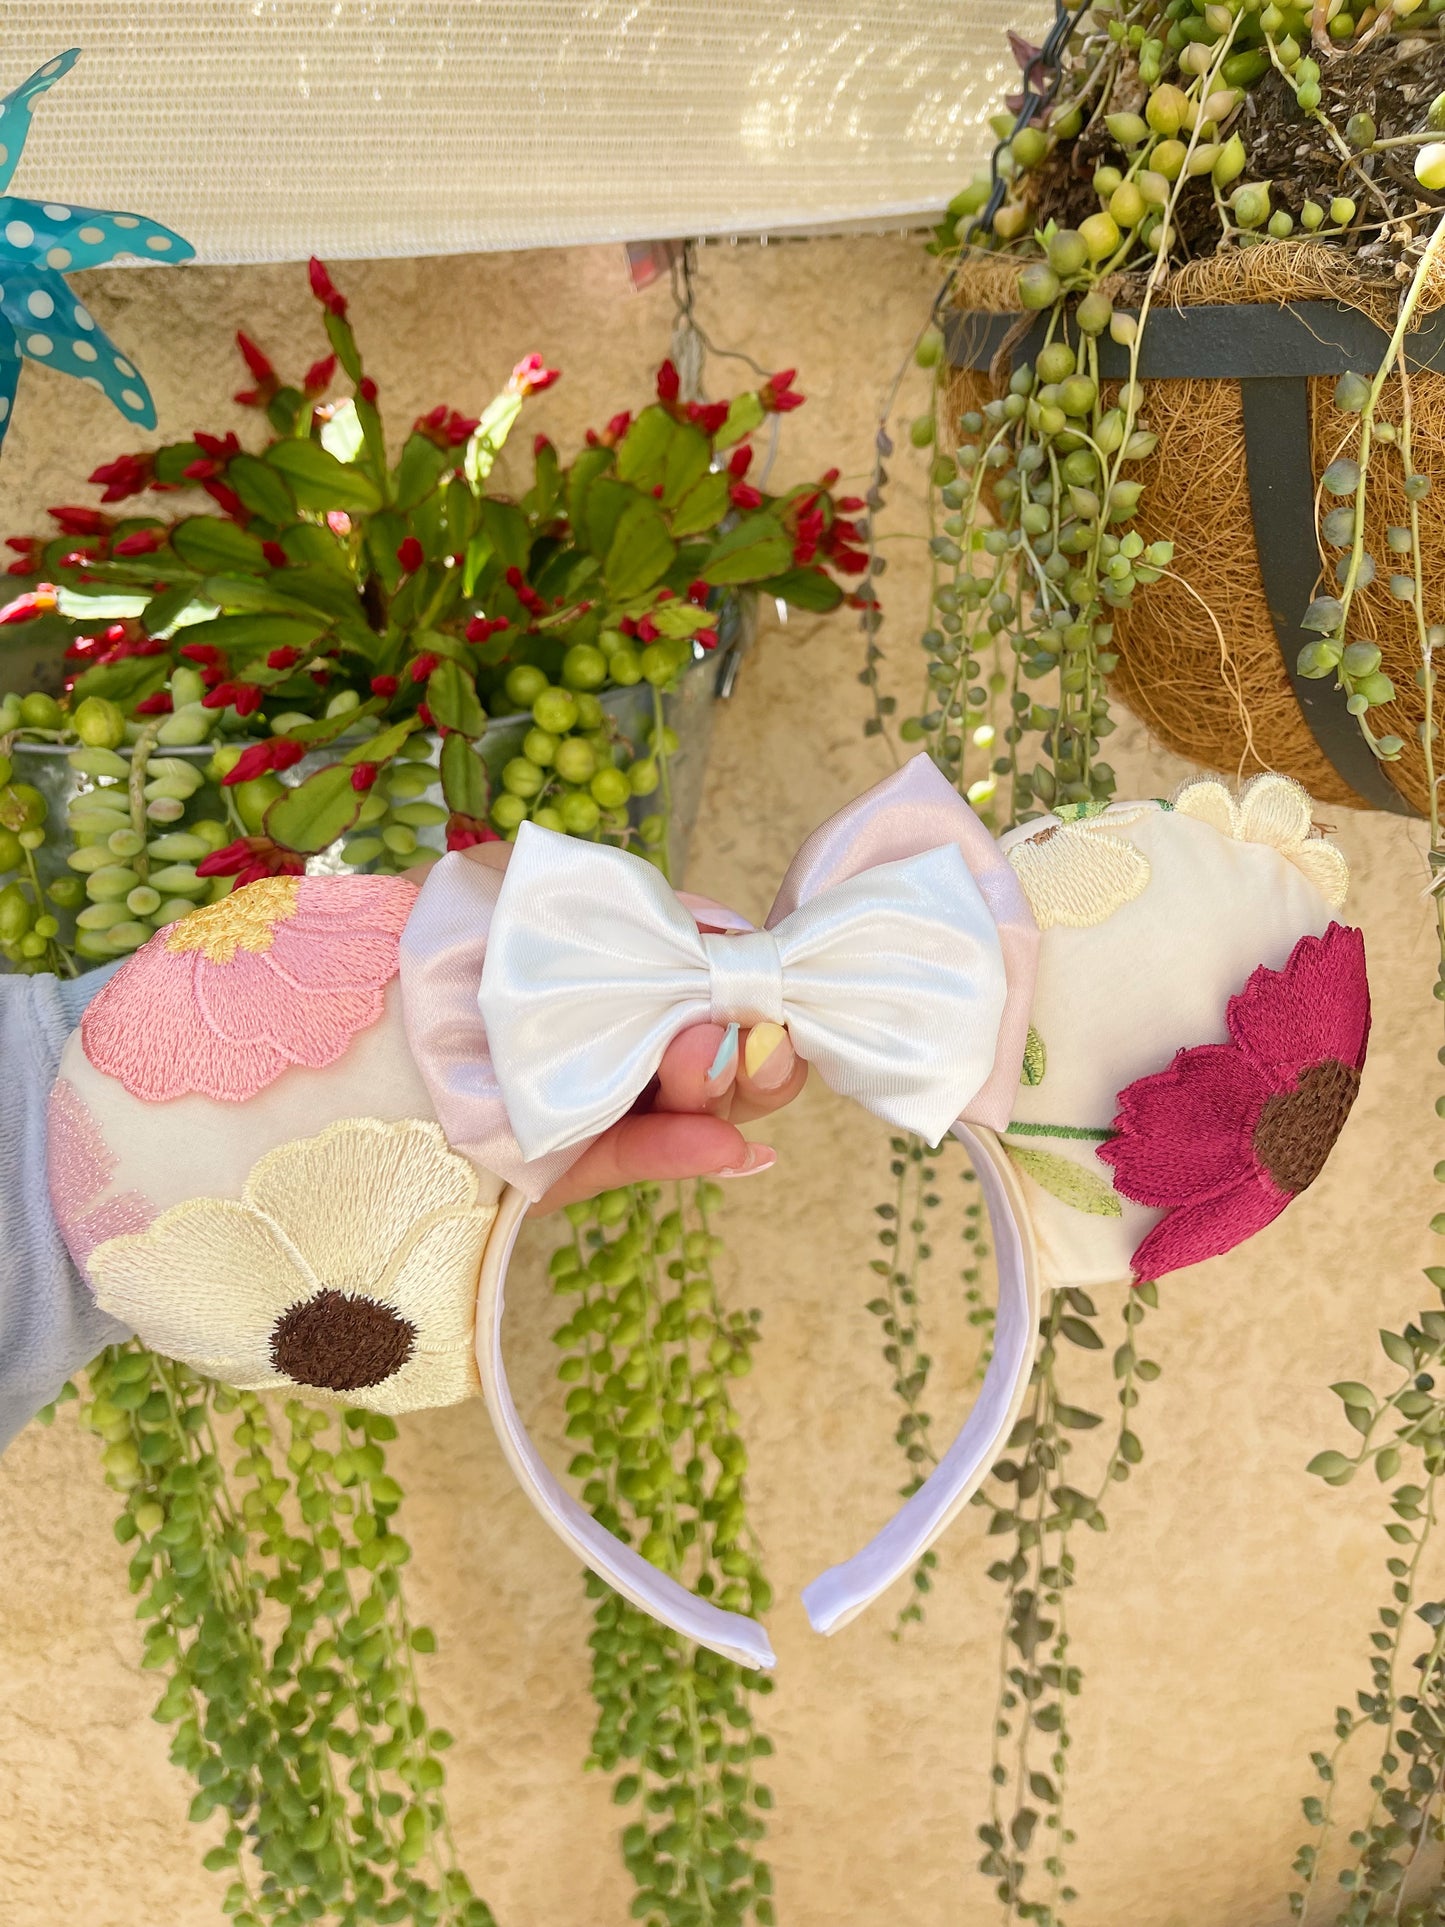 Taylor Swift Floral Dress Inspired Ears